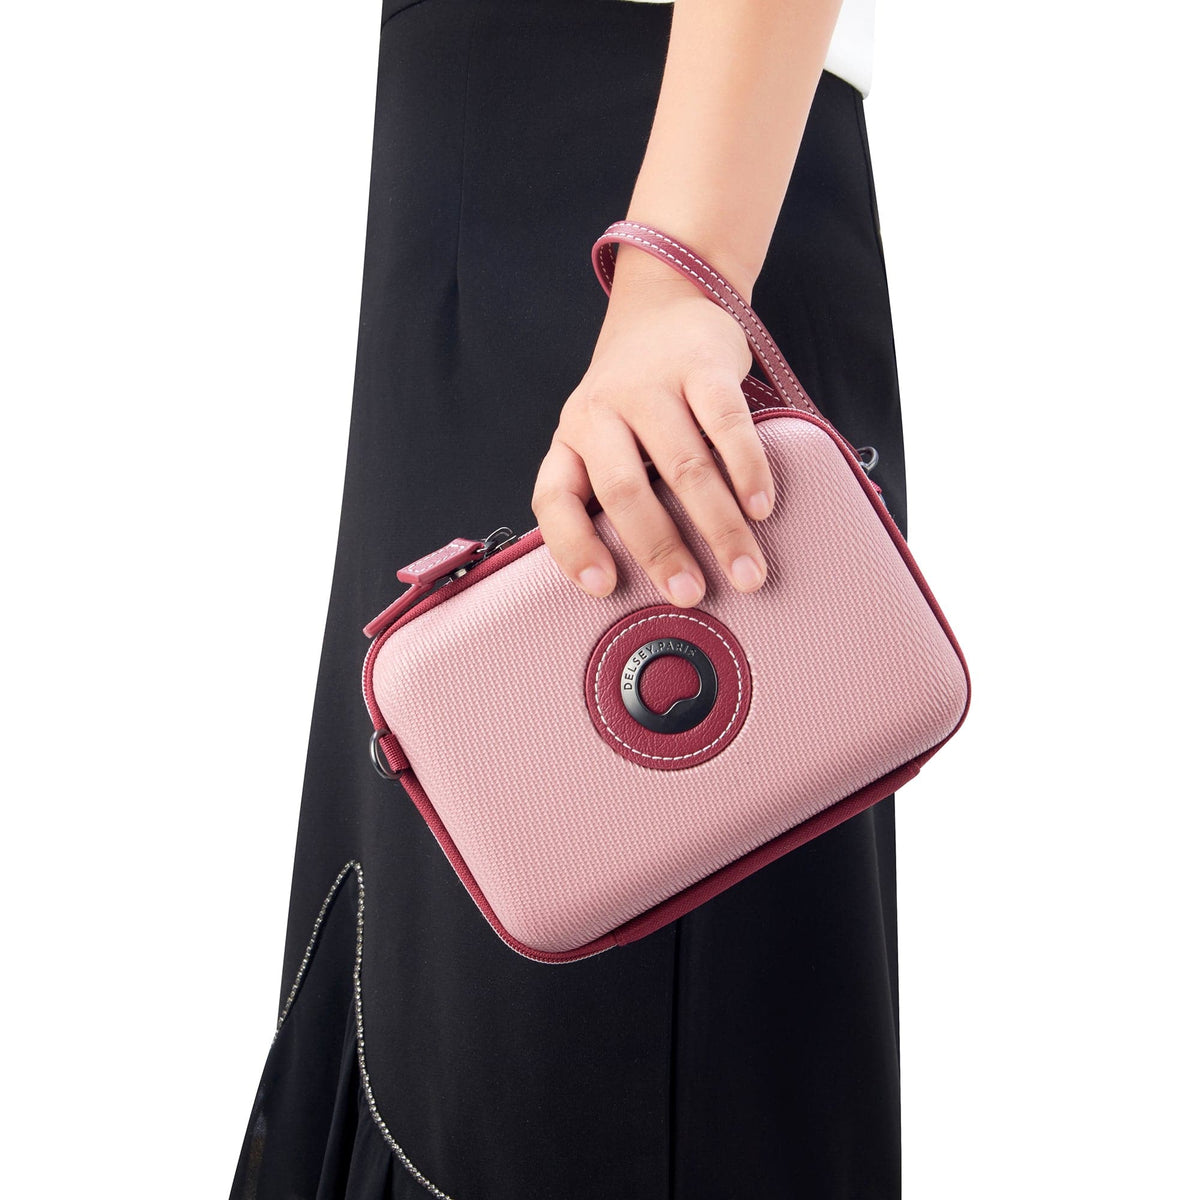 Delsey Chatelet Air 2.0 Cross-Body